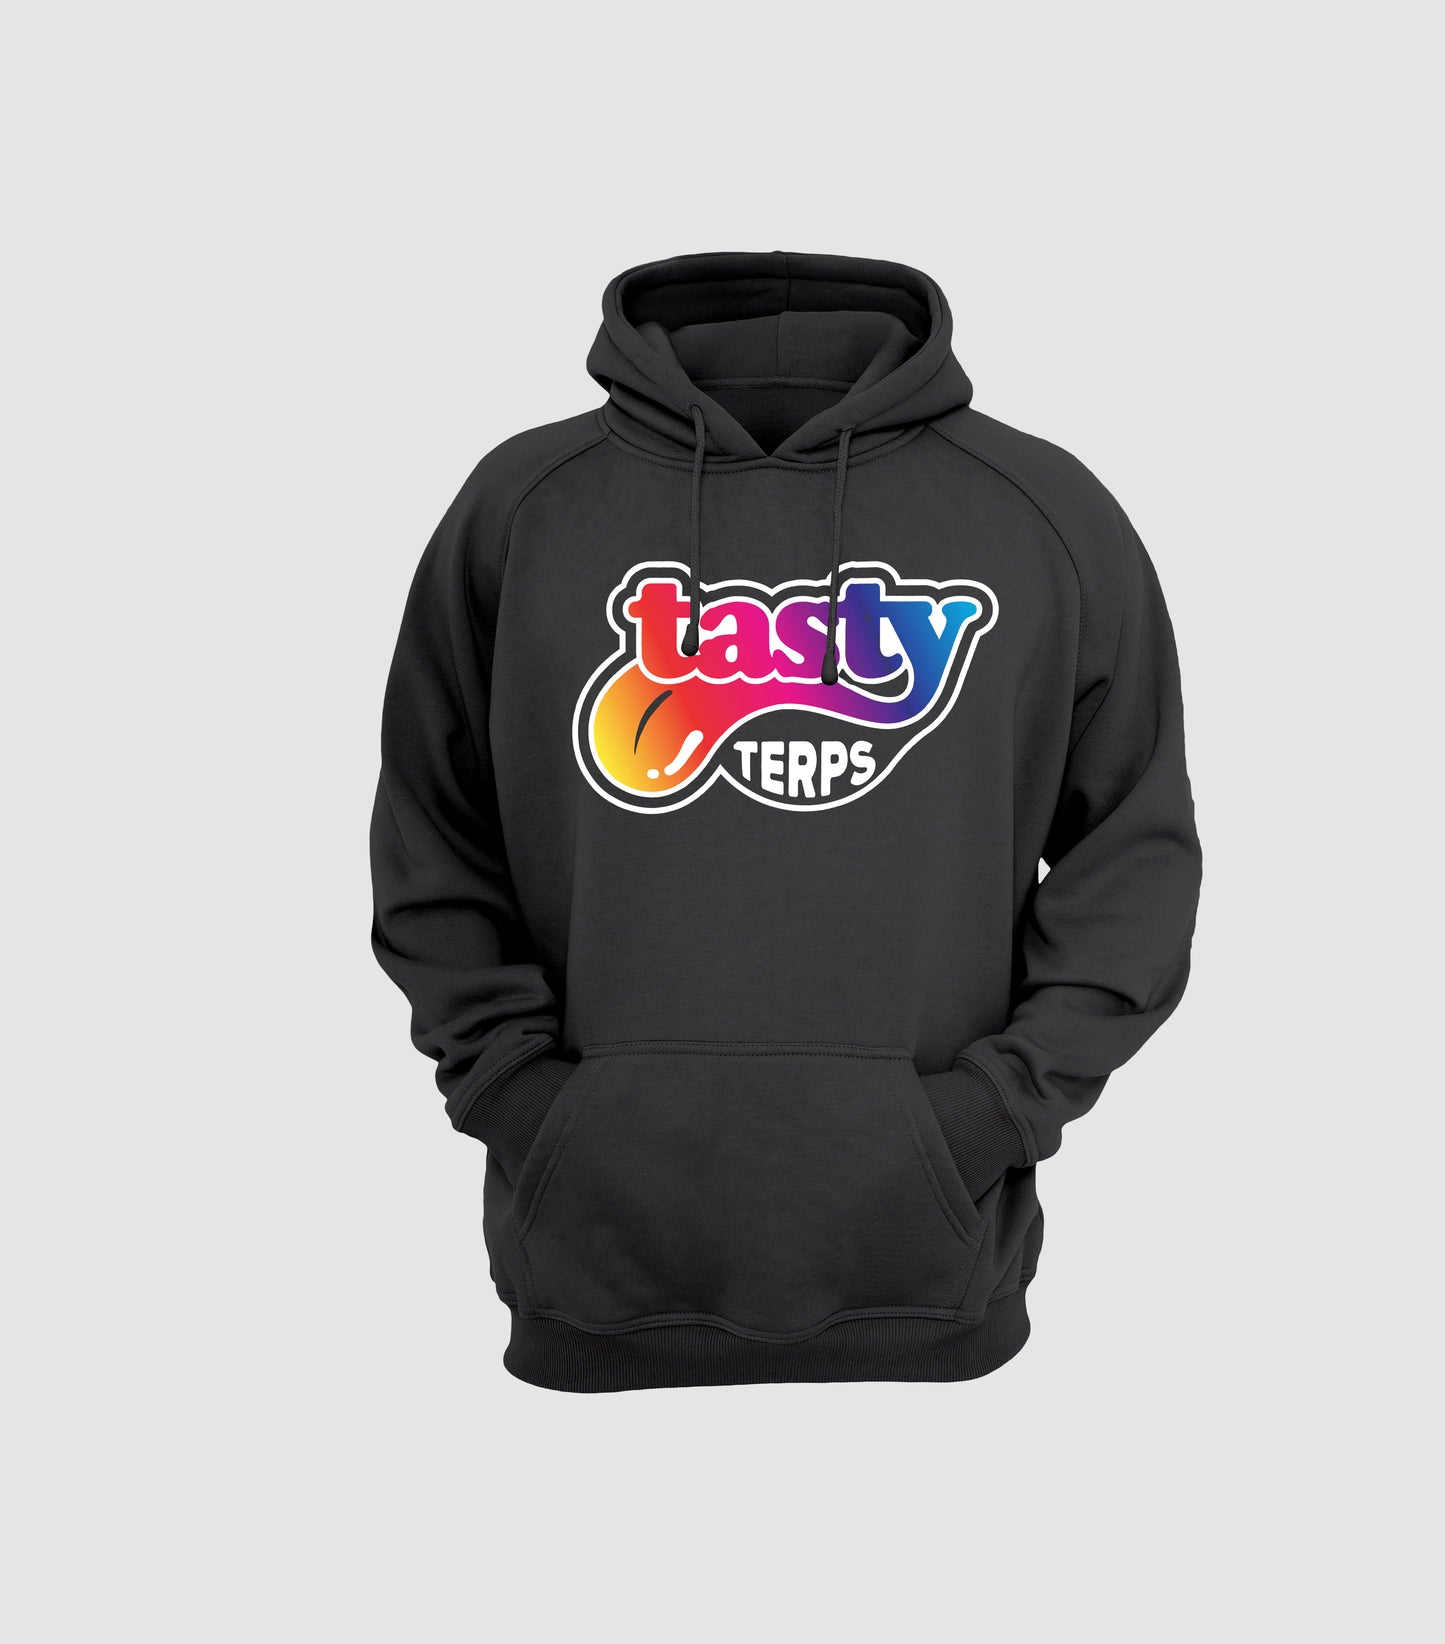 Tasty Terps Logo - Black Hoodie SOLD OUT